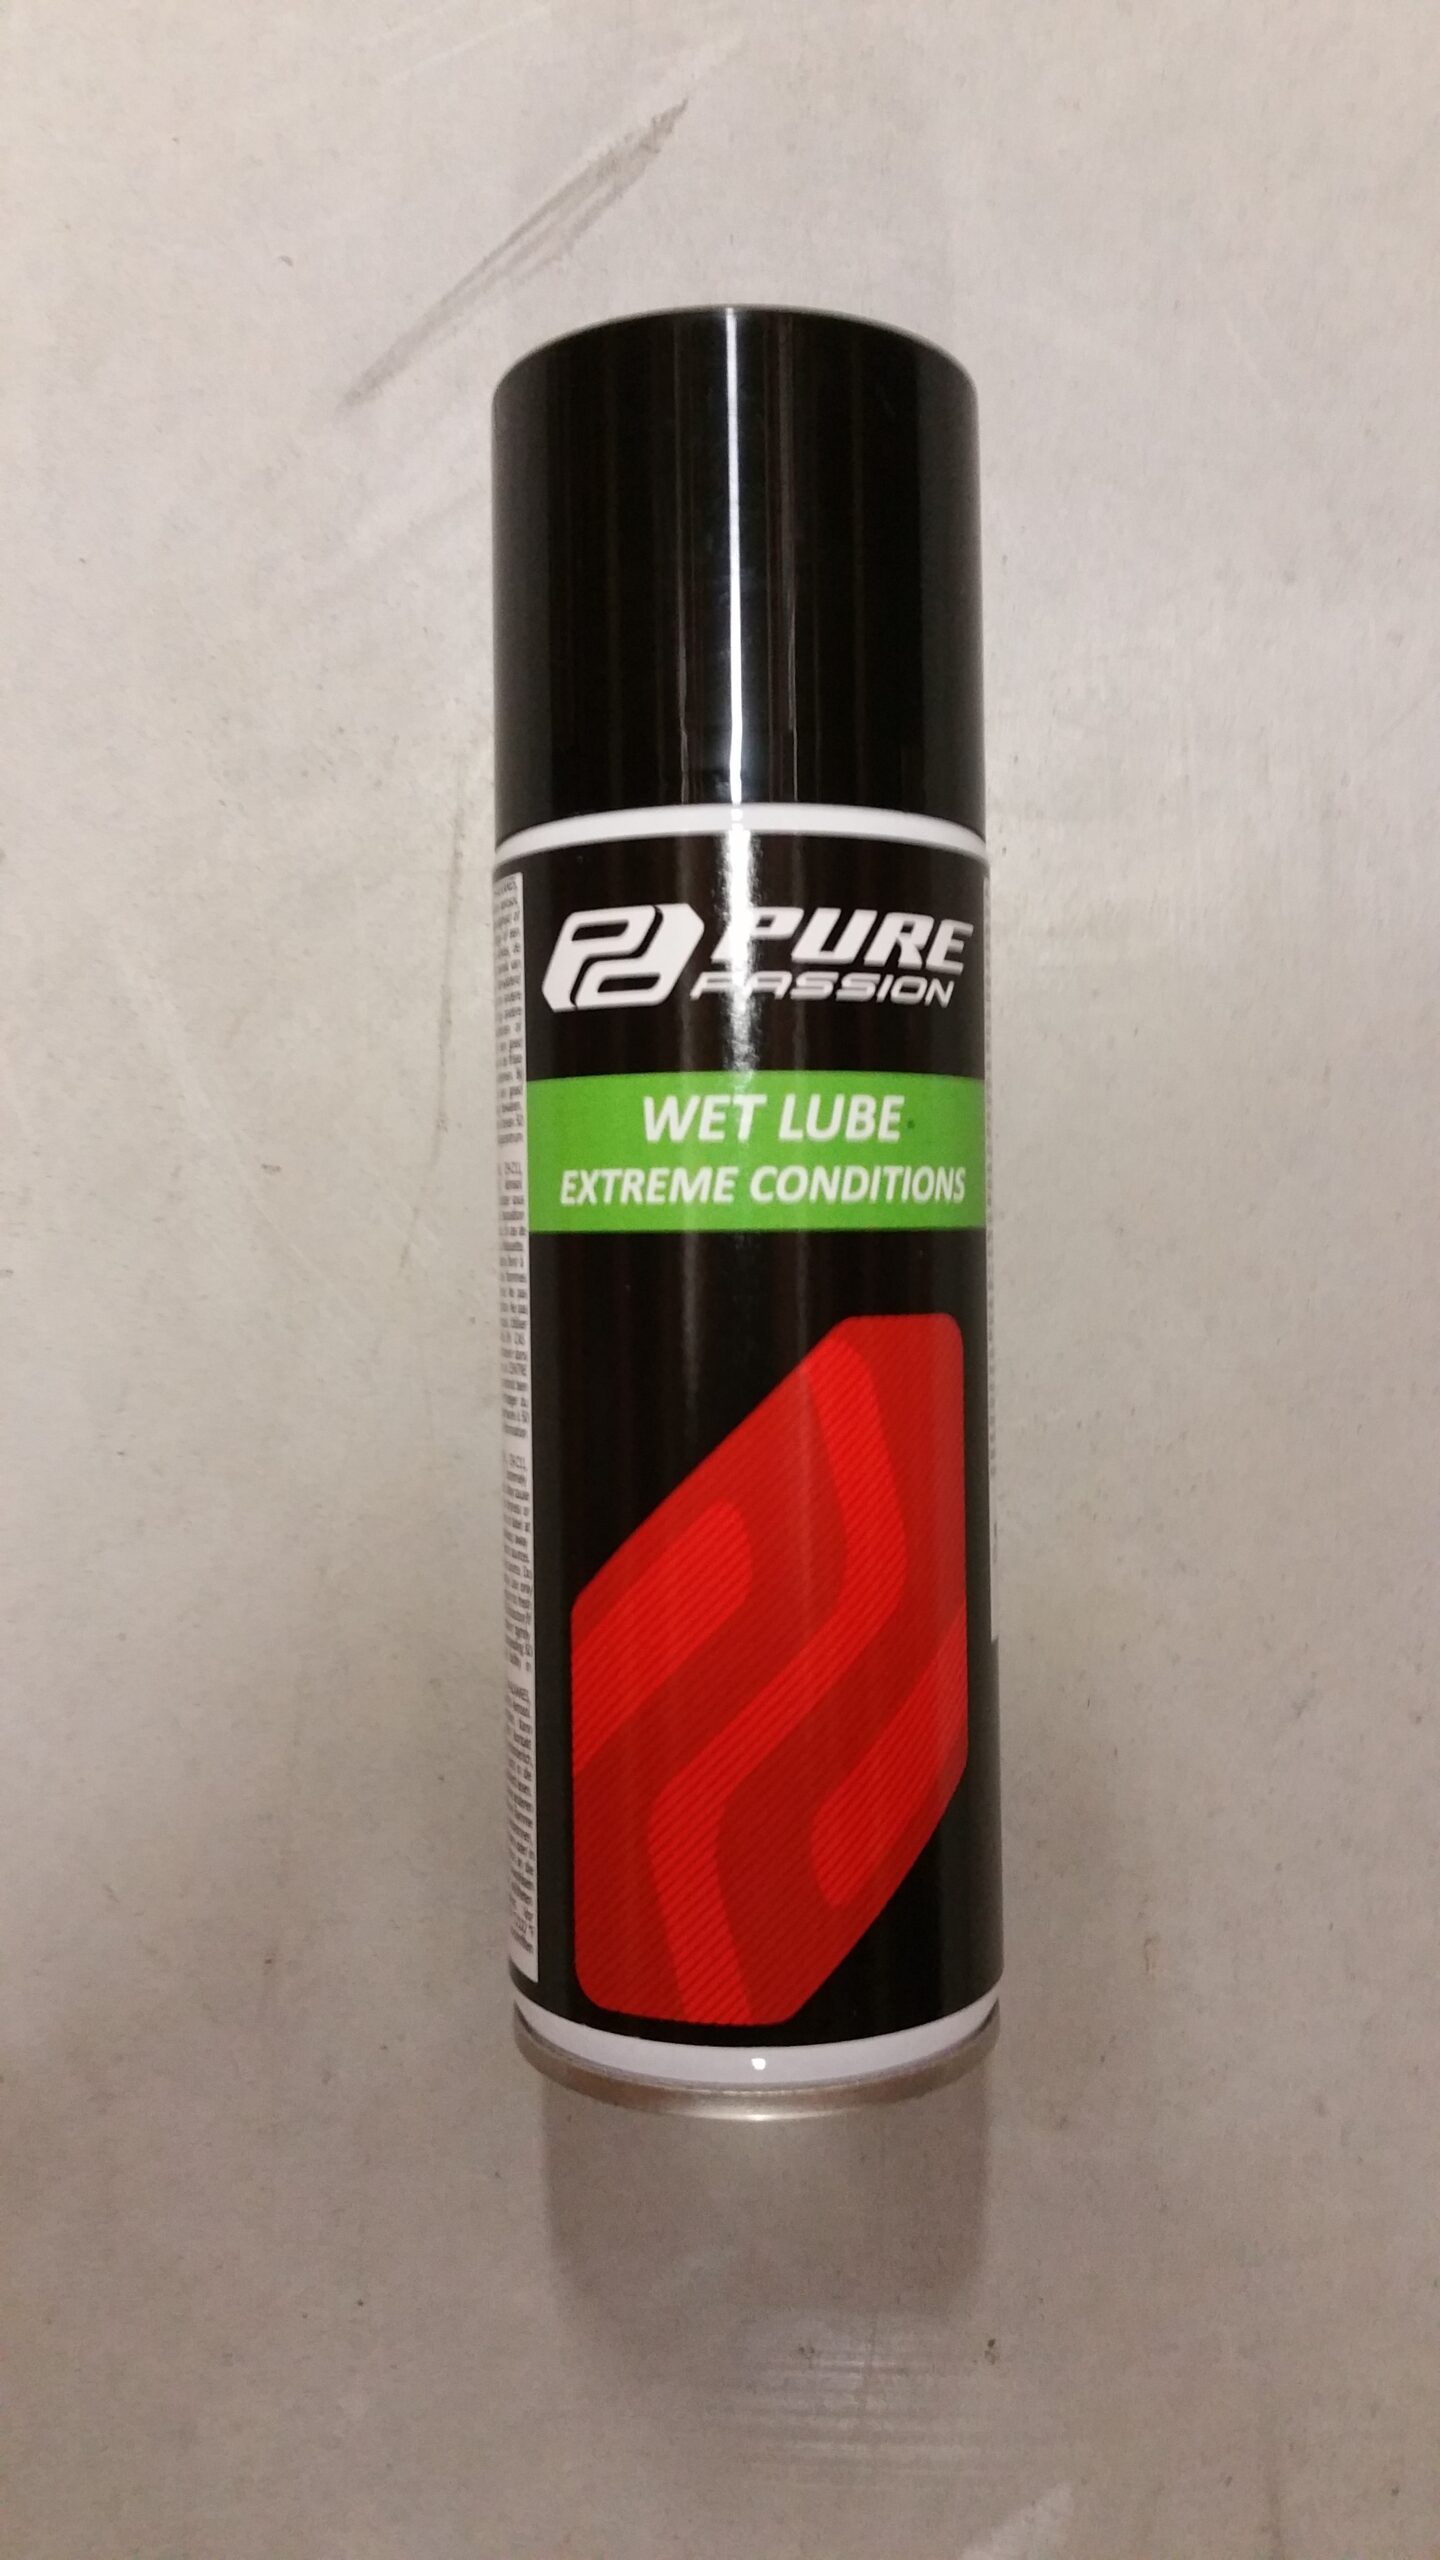 Pure Passion Wet Lube 200ml Spray